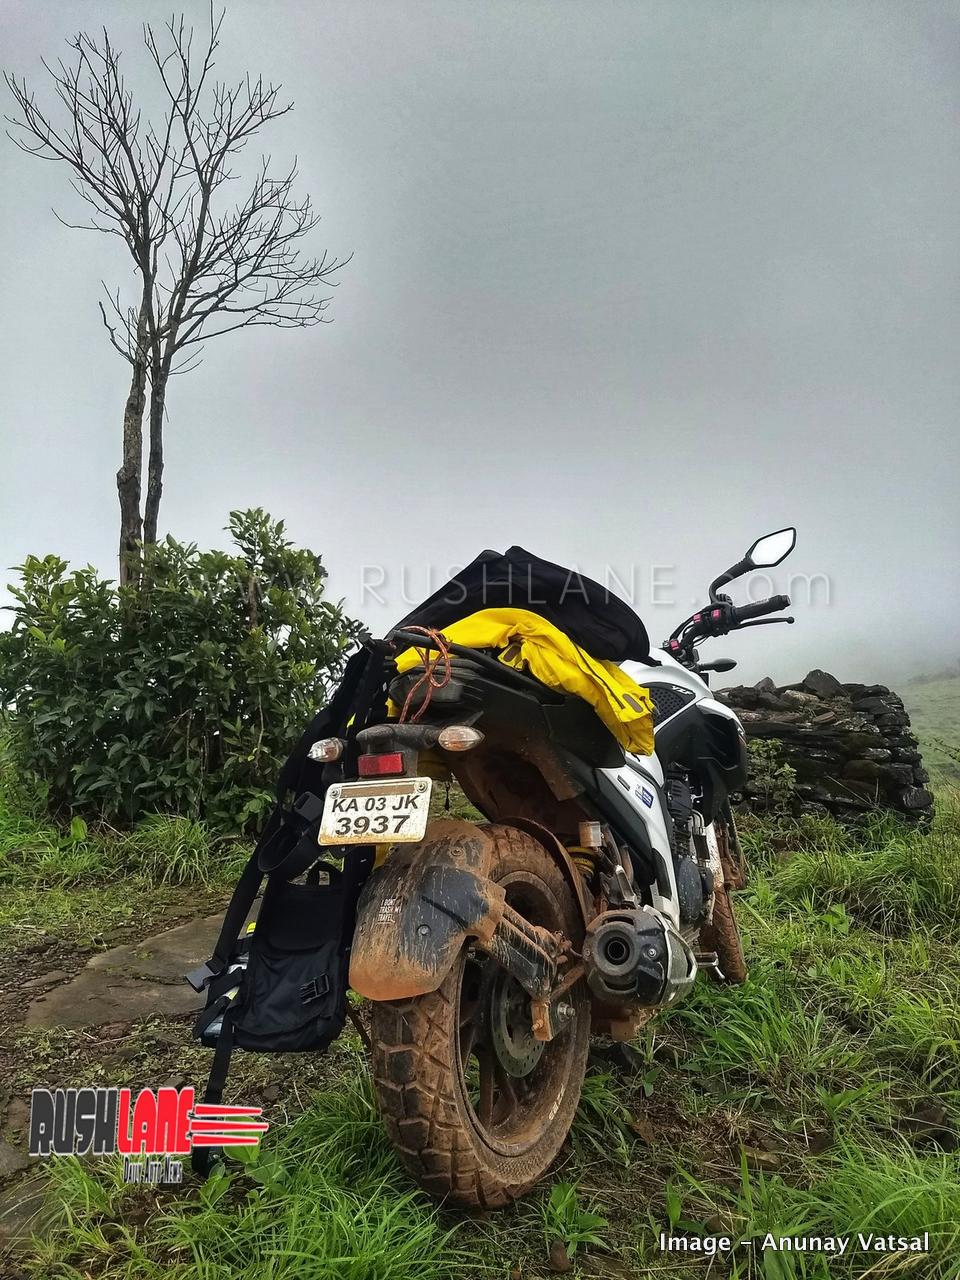 Yamaha FZ25 review by owner after completing 25k kms A 